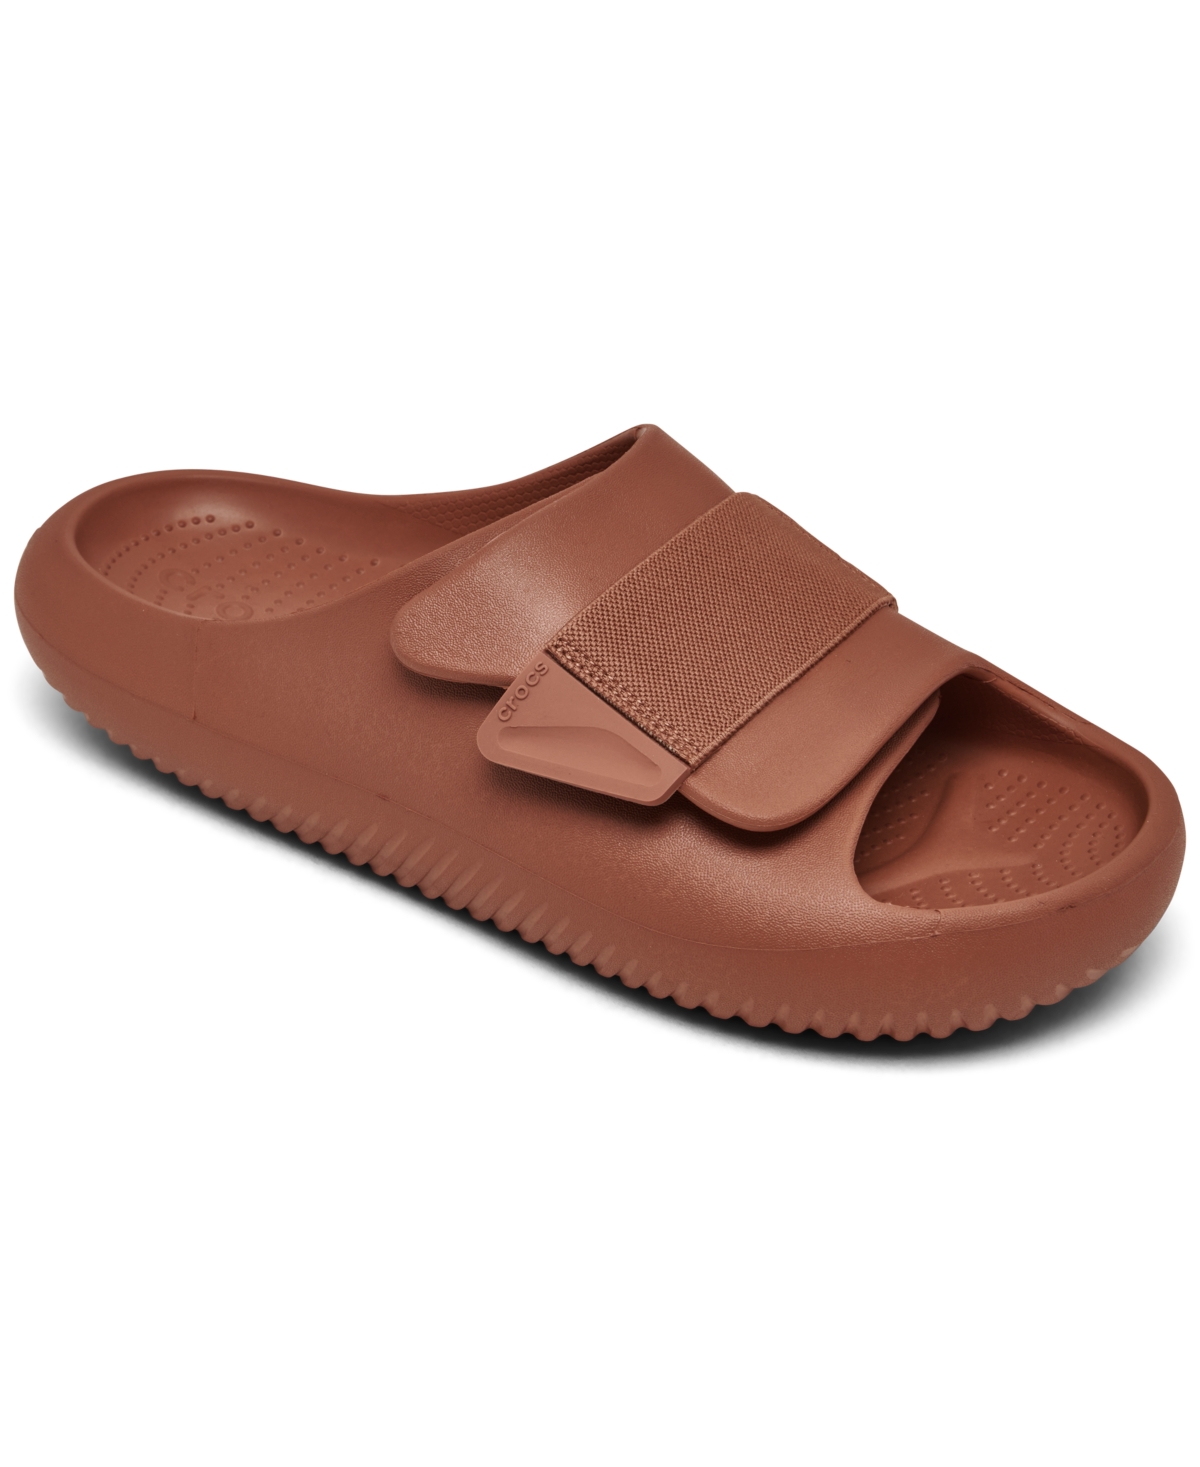 Men's Mellow Luxe Recovery Slide Sandals from Finish Line - Spice